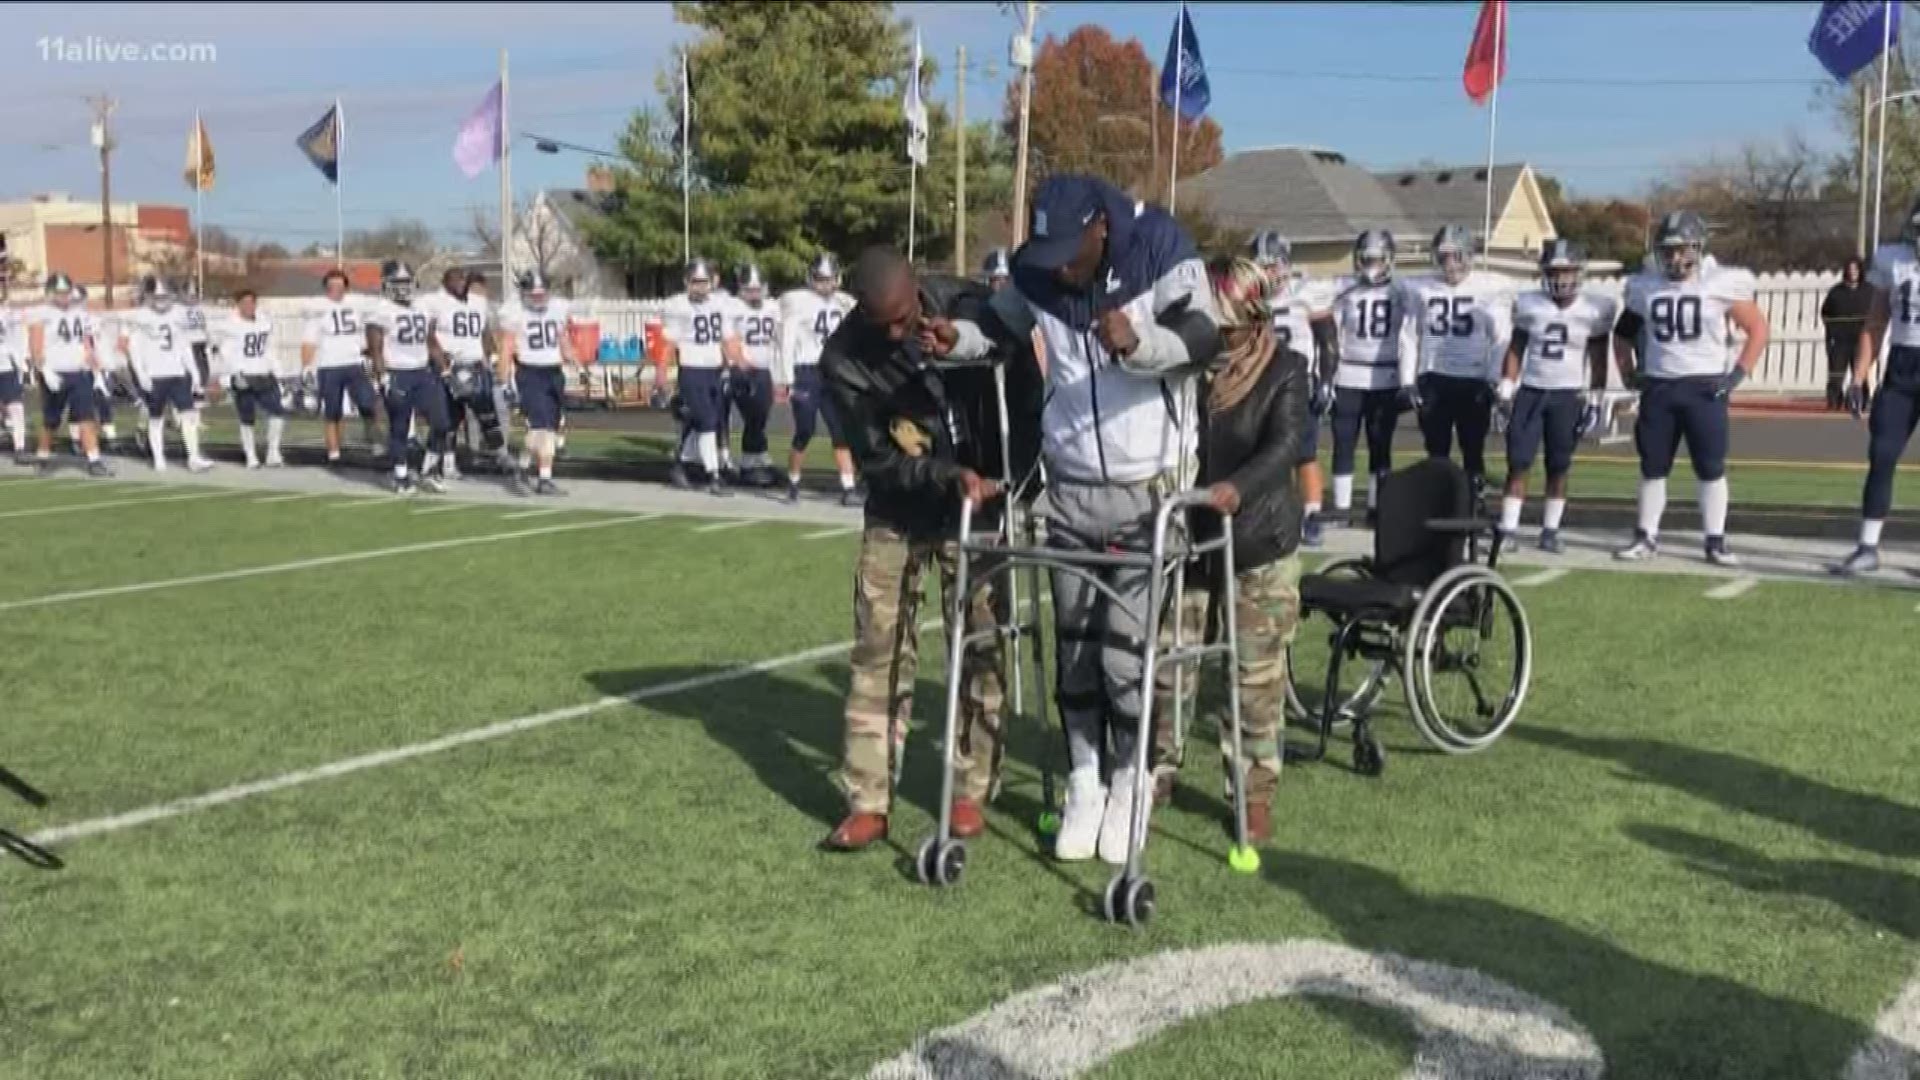 A Berry College player was told 14 months ago he would likely never be able to walk again. He's defying the odds.